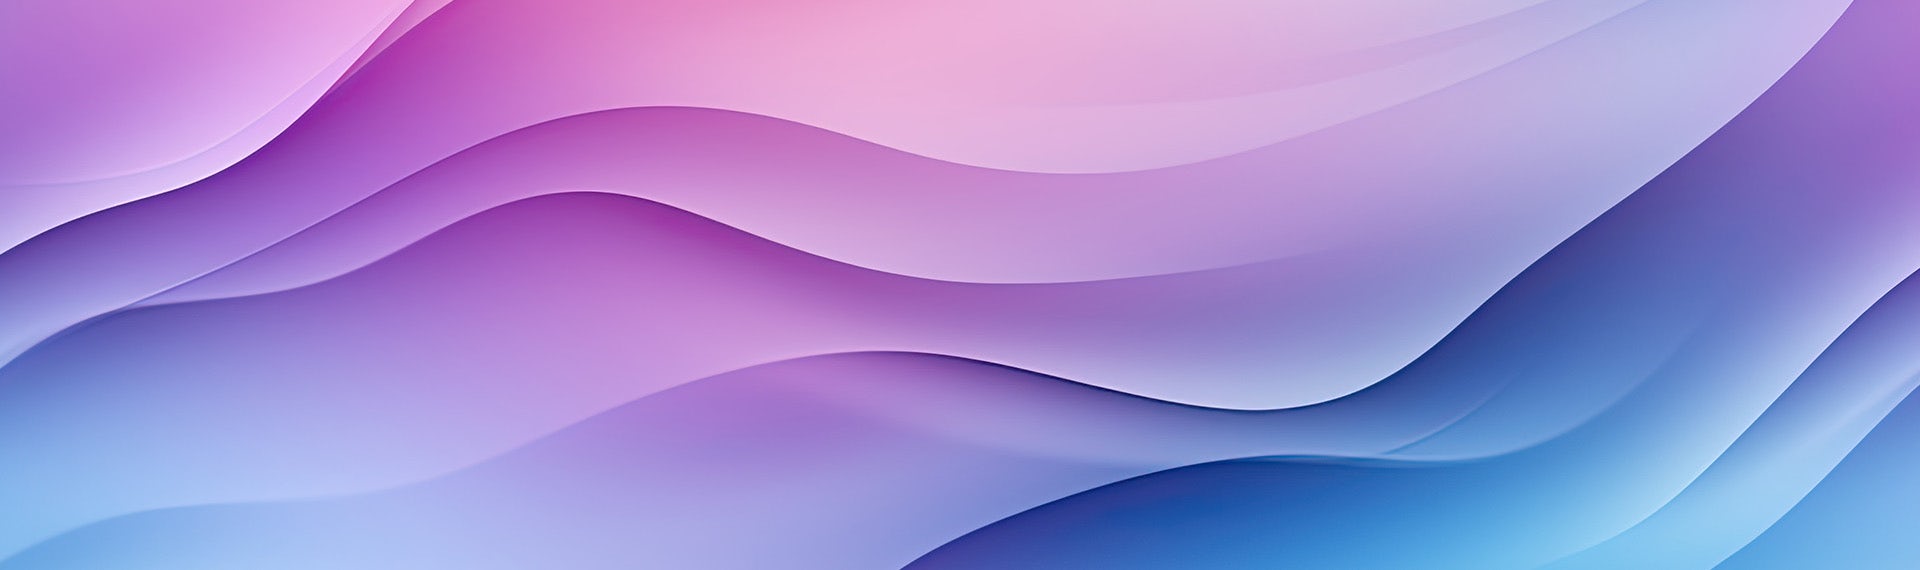 A blue and purple abstract background with wavy lines.